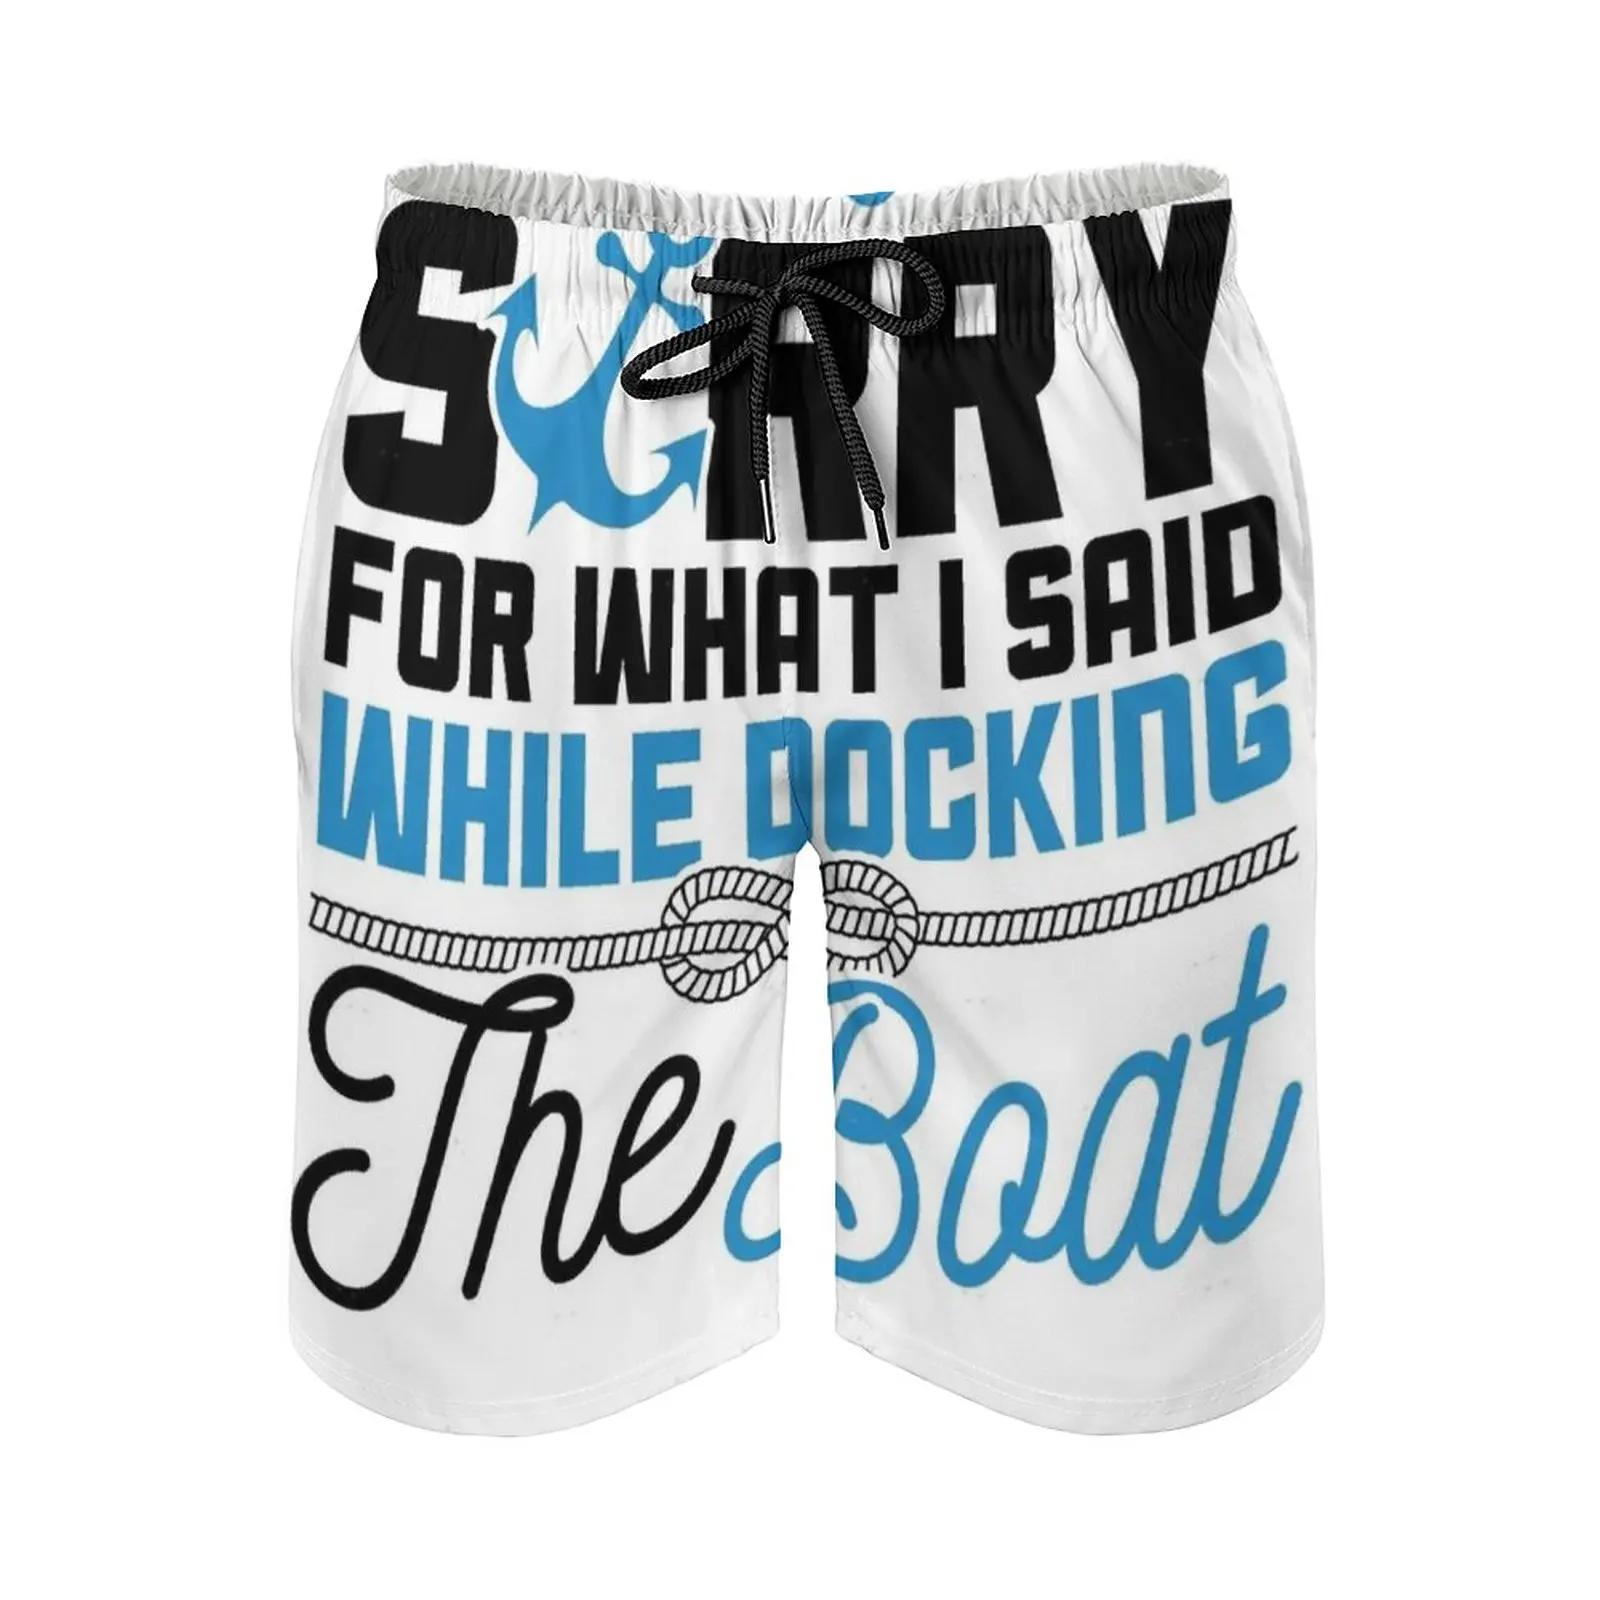 

Savvy Turtle Funny Boating Design Sorry For What I Said Men's Sports Short Beach Shorts Surfing Swimming Boxer Trunks Joking On